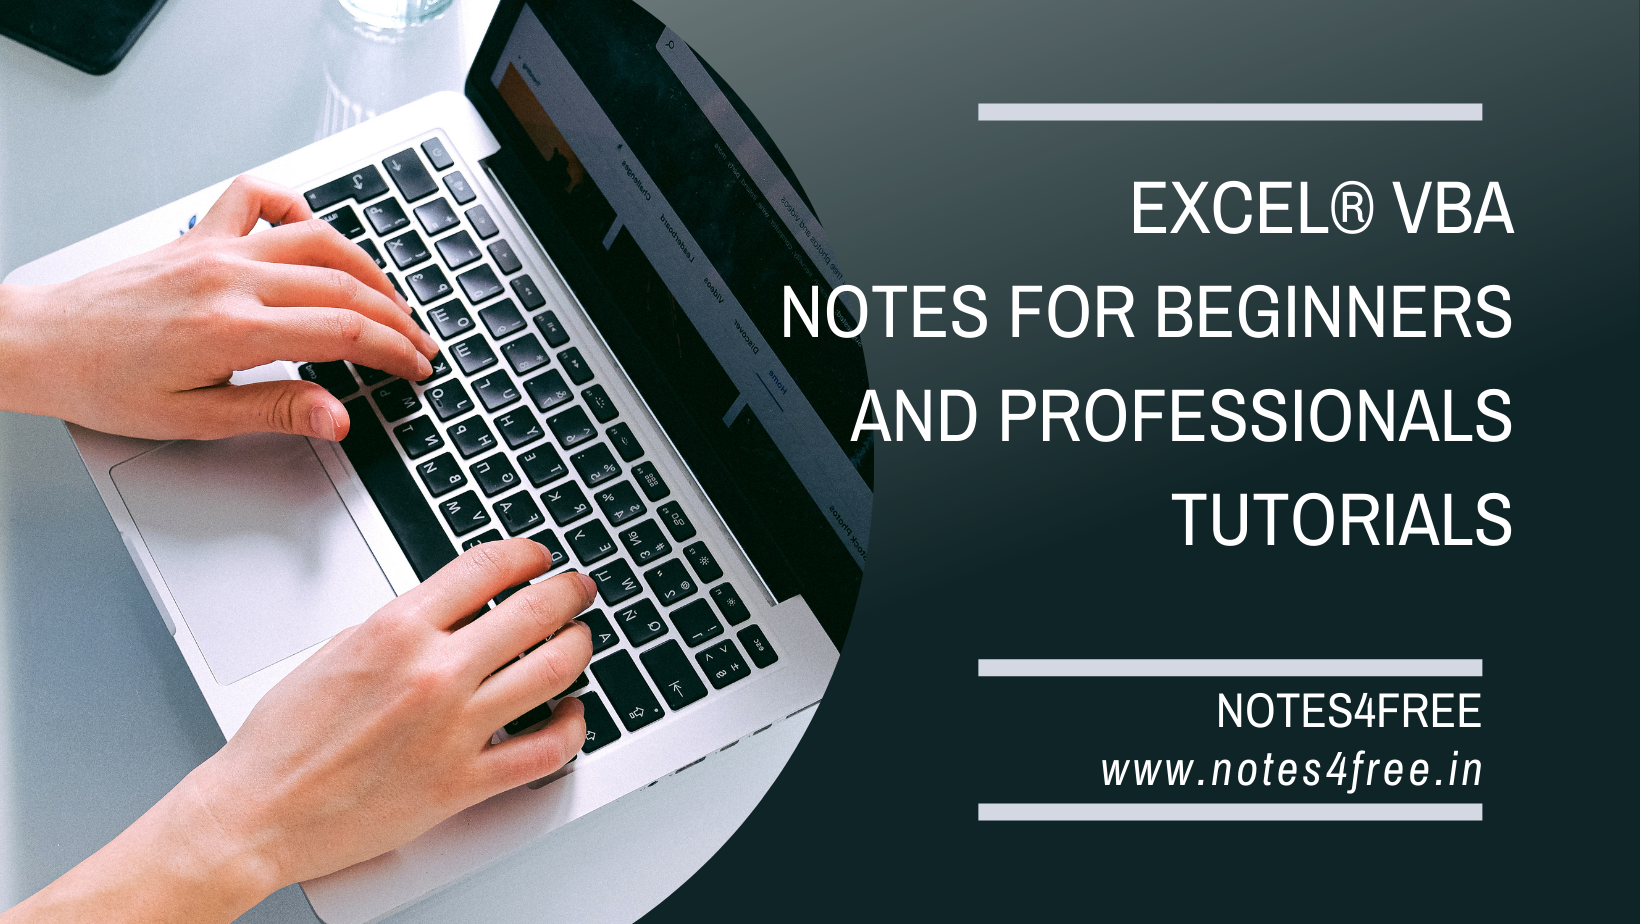 Excel VBA Notes for beginners and Professionals books